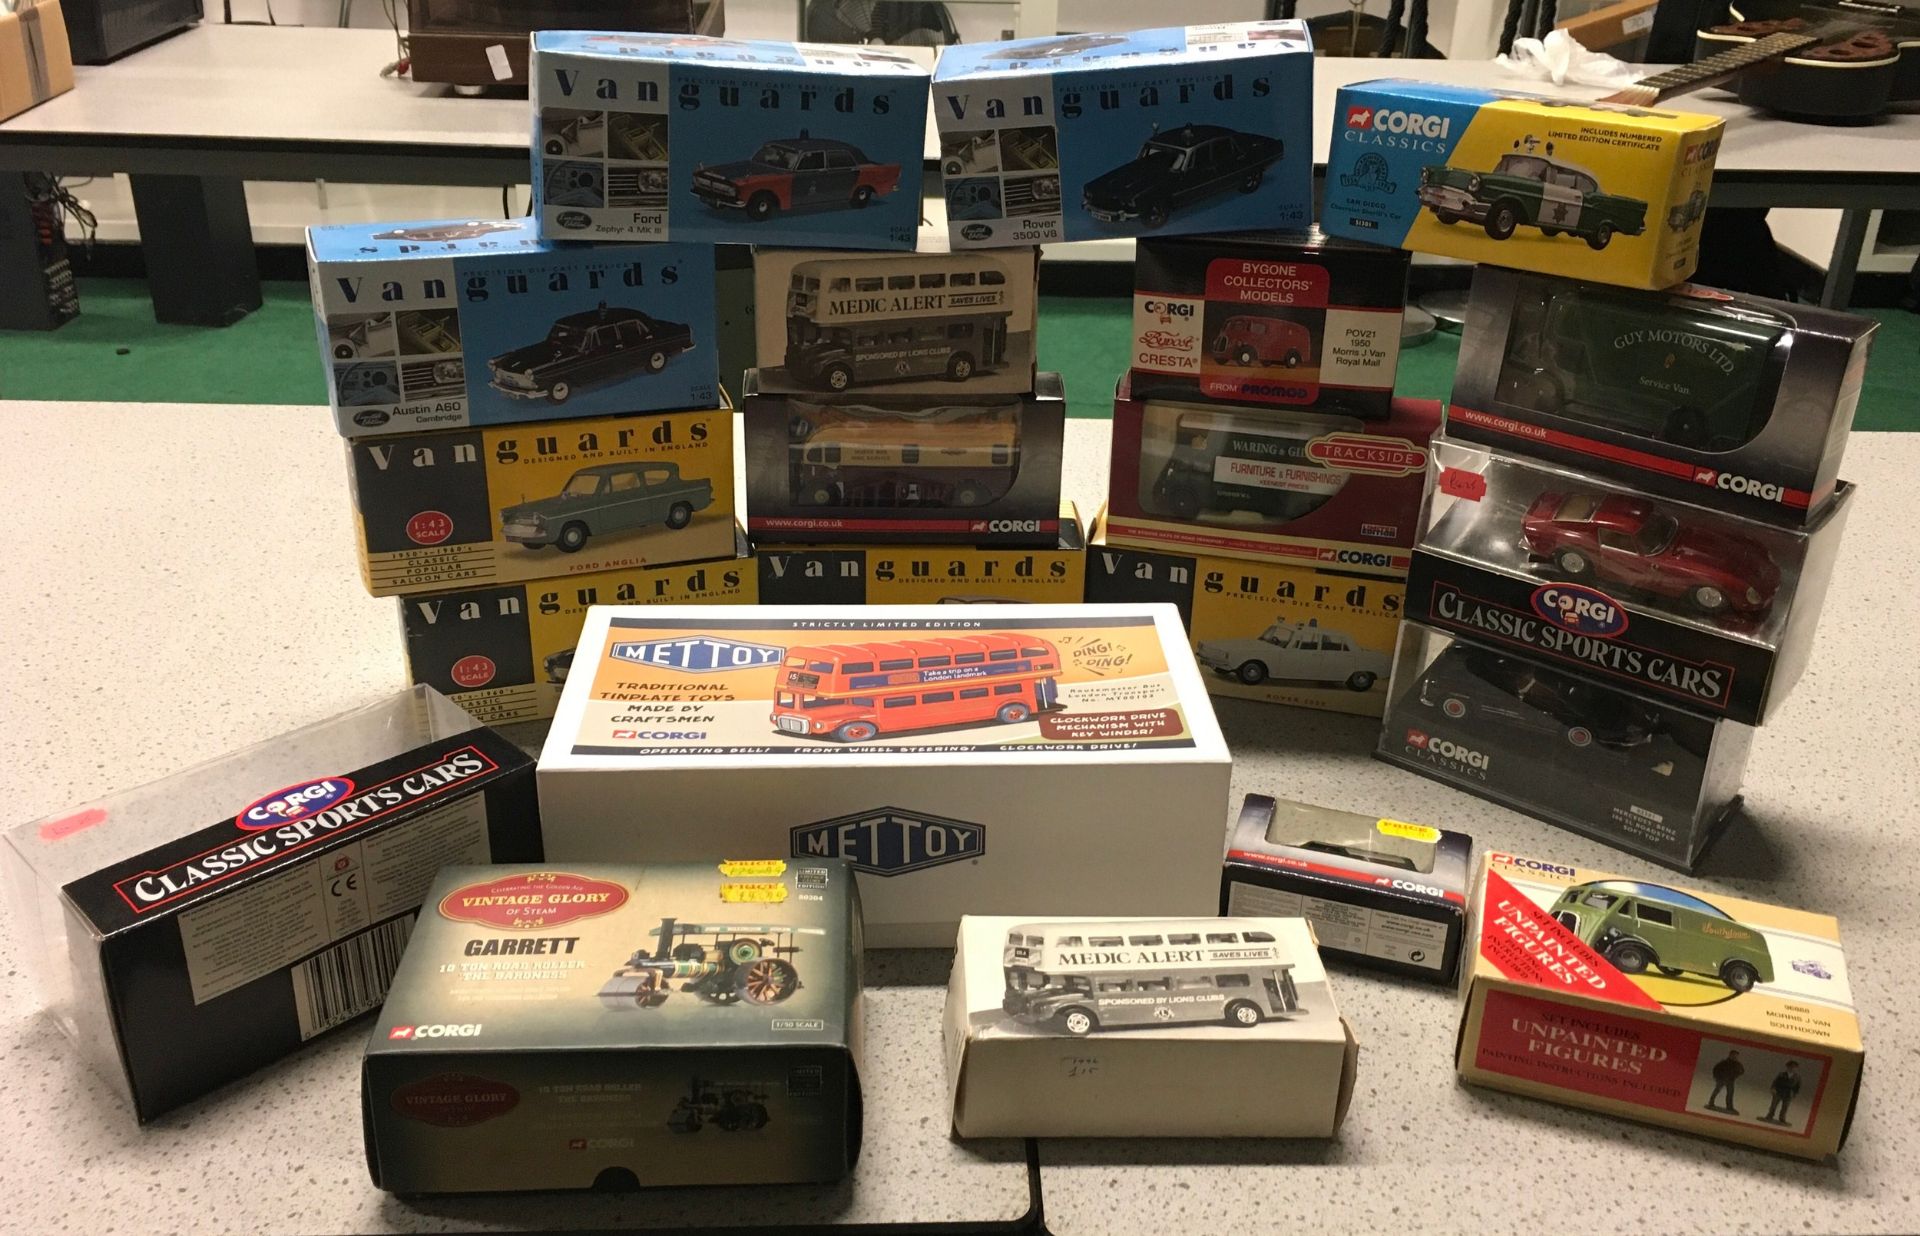 Collection of boxed Corgi and Vanguard models to include Classic Sports Cars, Vintage Glory of Steam